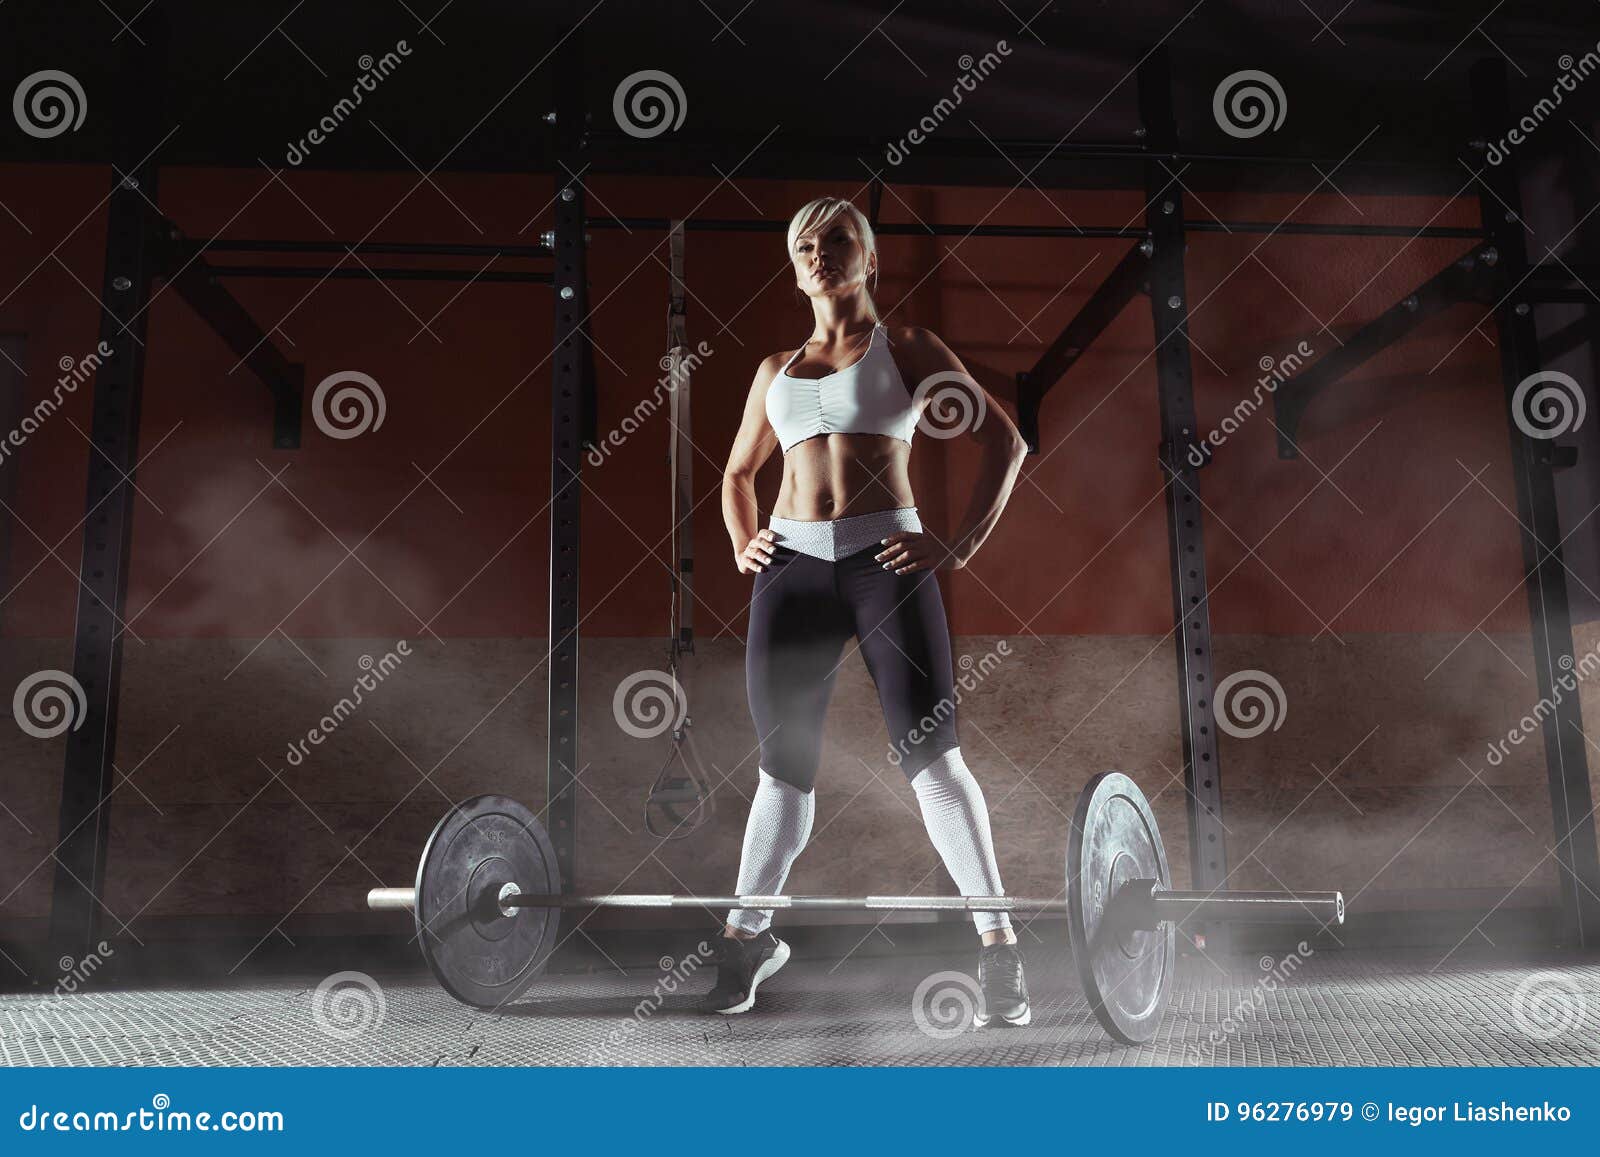 Muscular Young Fitness Woman Lifting A Weight In The Gym Stock Image ...